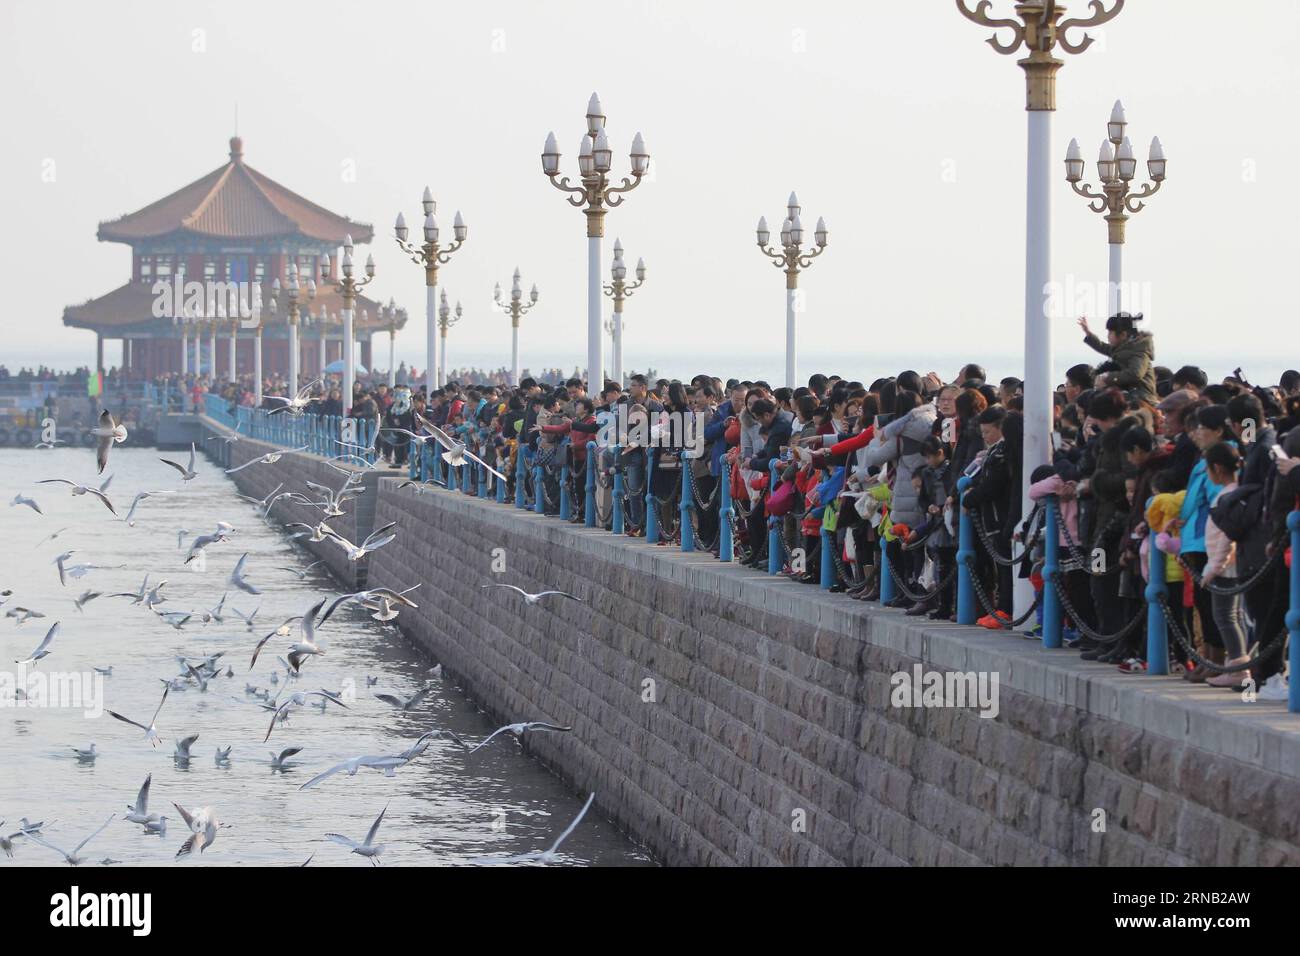 (160215) -- QINGDAO, Feb. 15, 2016 -- Tourists look at seagulls at the Zhanqiao Bridge scenic zone in Qingdao, east China s Shandong Province, Feb. 8, 2016. China s tourism revenue during the Spring Festival holiday reached 365.1 billion yuan (55.7 billion U.S. dollars), up 16.3 percent year on year. The number of tourists during the seven-day holiday topped 302 million across the country, up 15.6 percent. )(mcg) CHINA-SPRING FESTIVAL HOLIDAY-TOURISM (CN) HuangxJiexian PUBLICATIONxNOTxINxCHN   Qingdao Feb 15 2016 tourists Look AT seagulls AT The Zhanqiao Bridge Scenic Zone in Qingdao East Chin Stock Photo